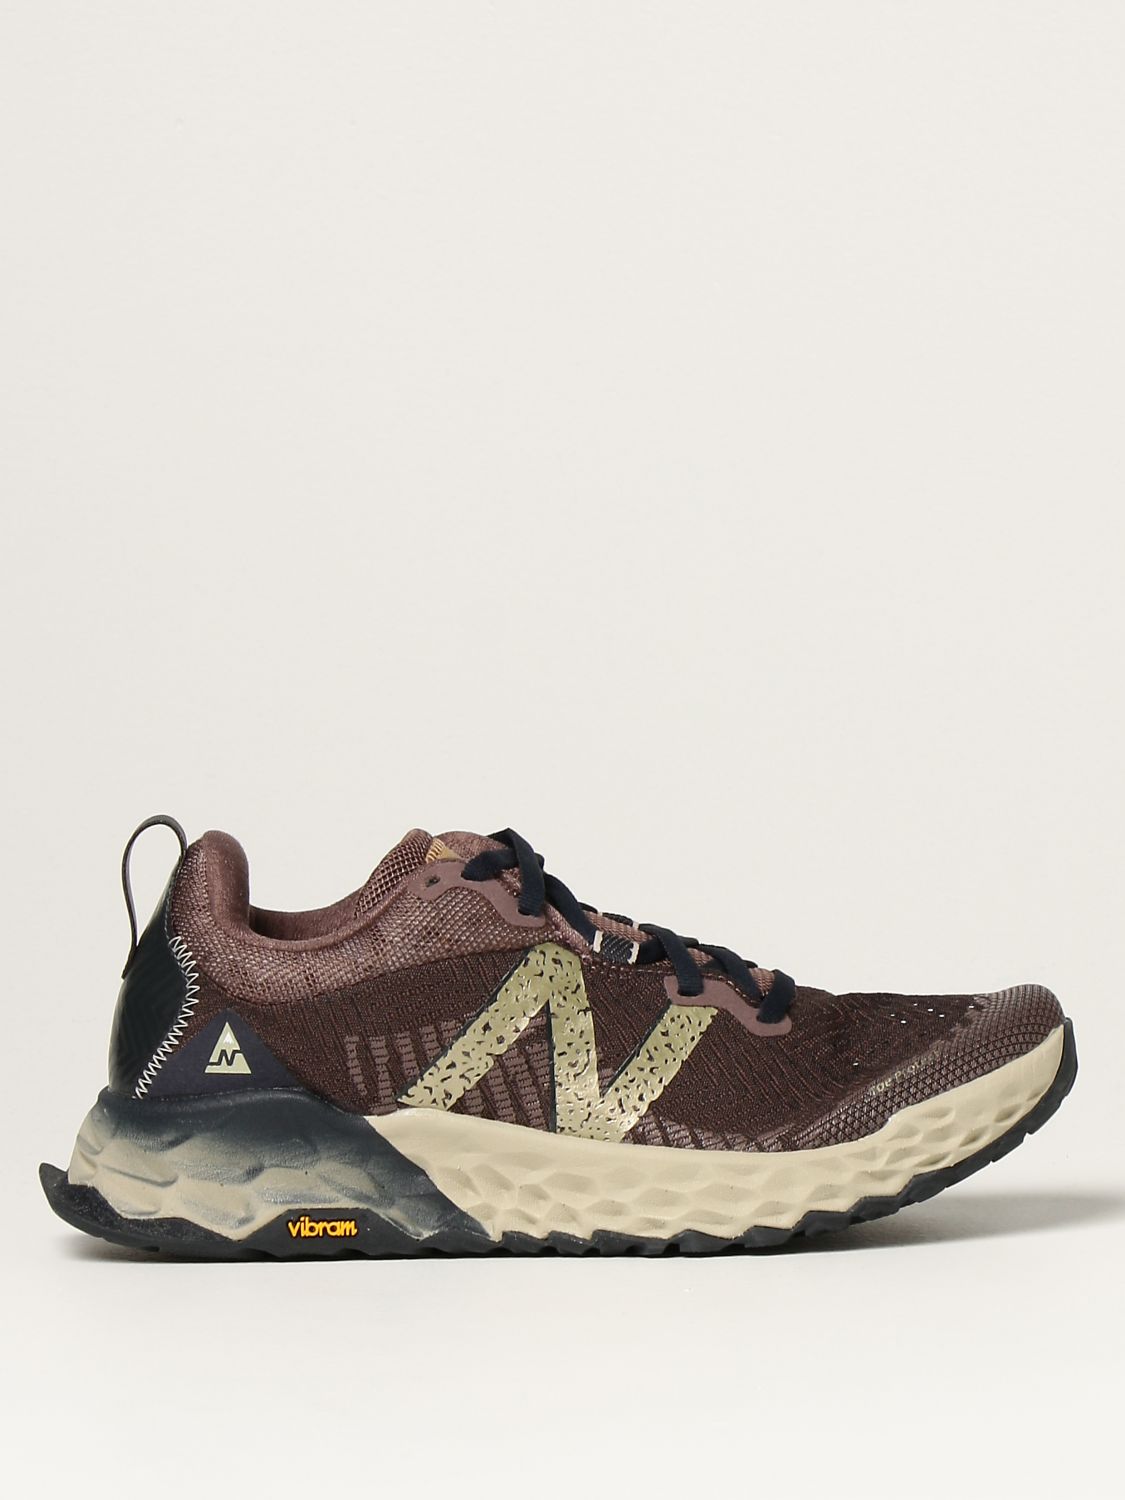 New Balance sneakers in knit and fabric